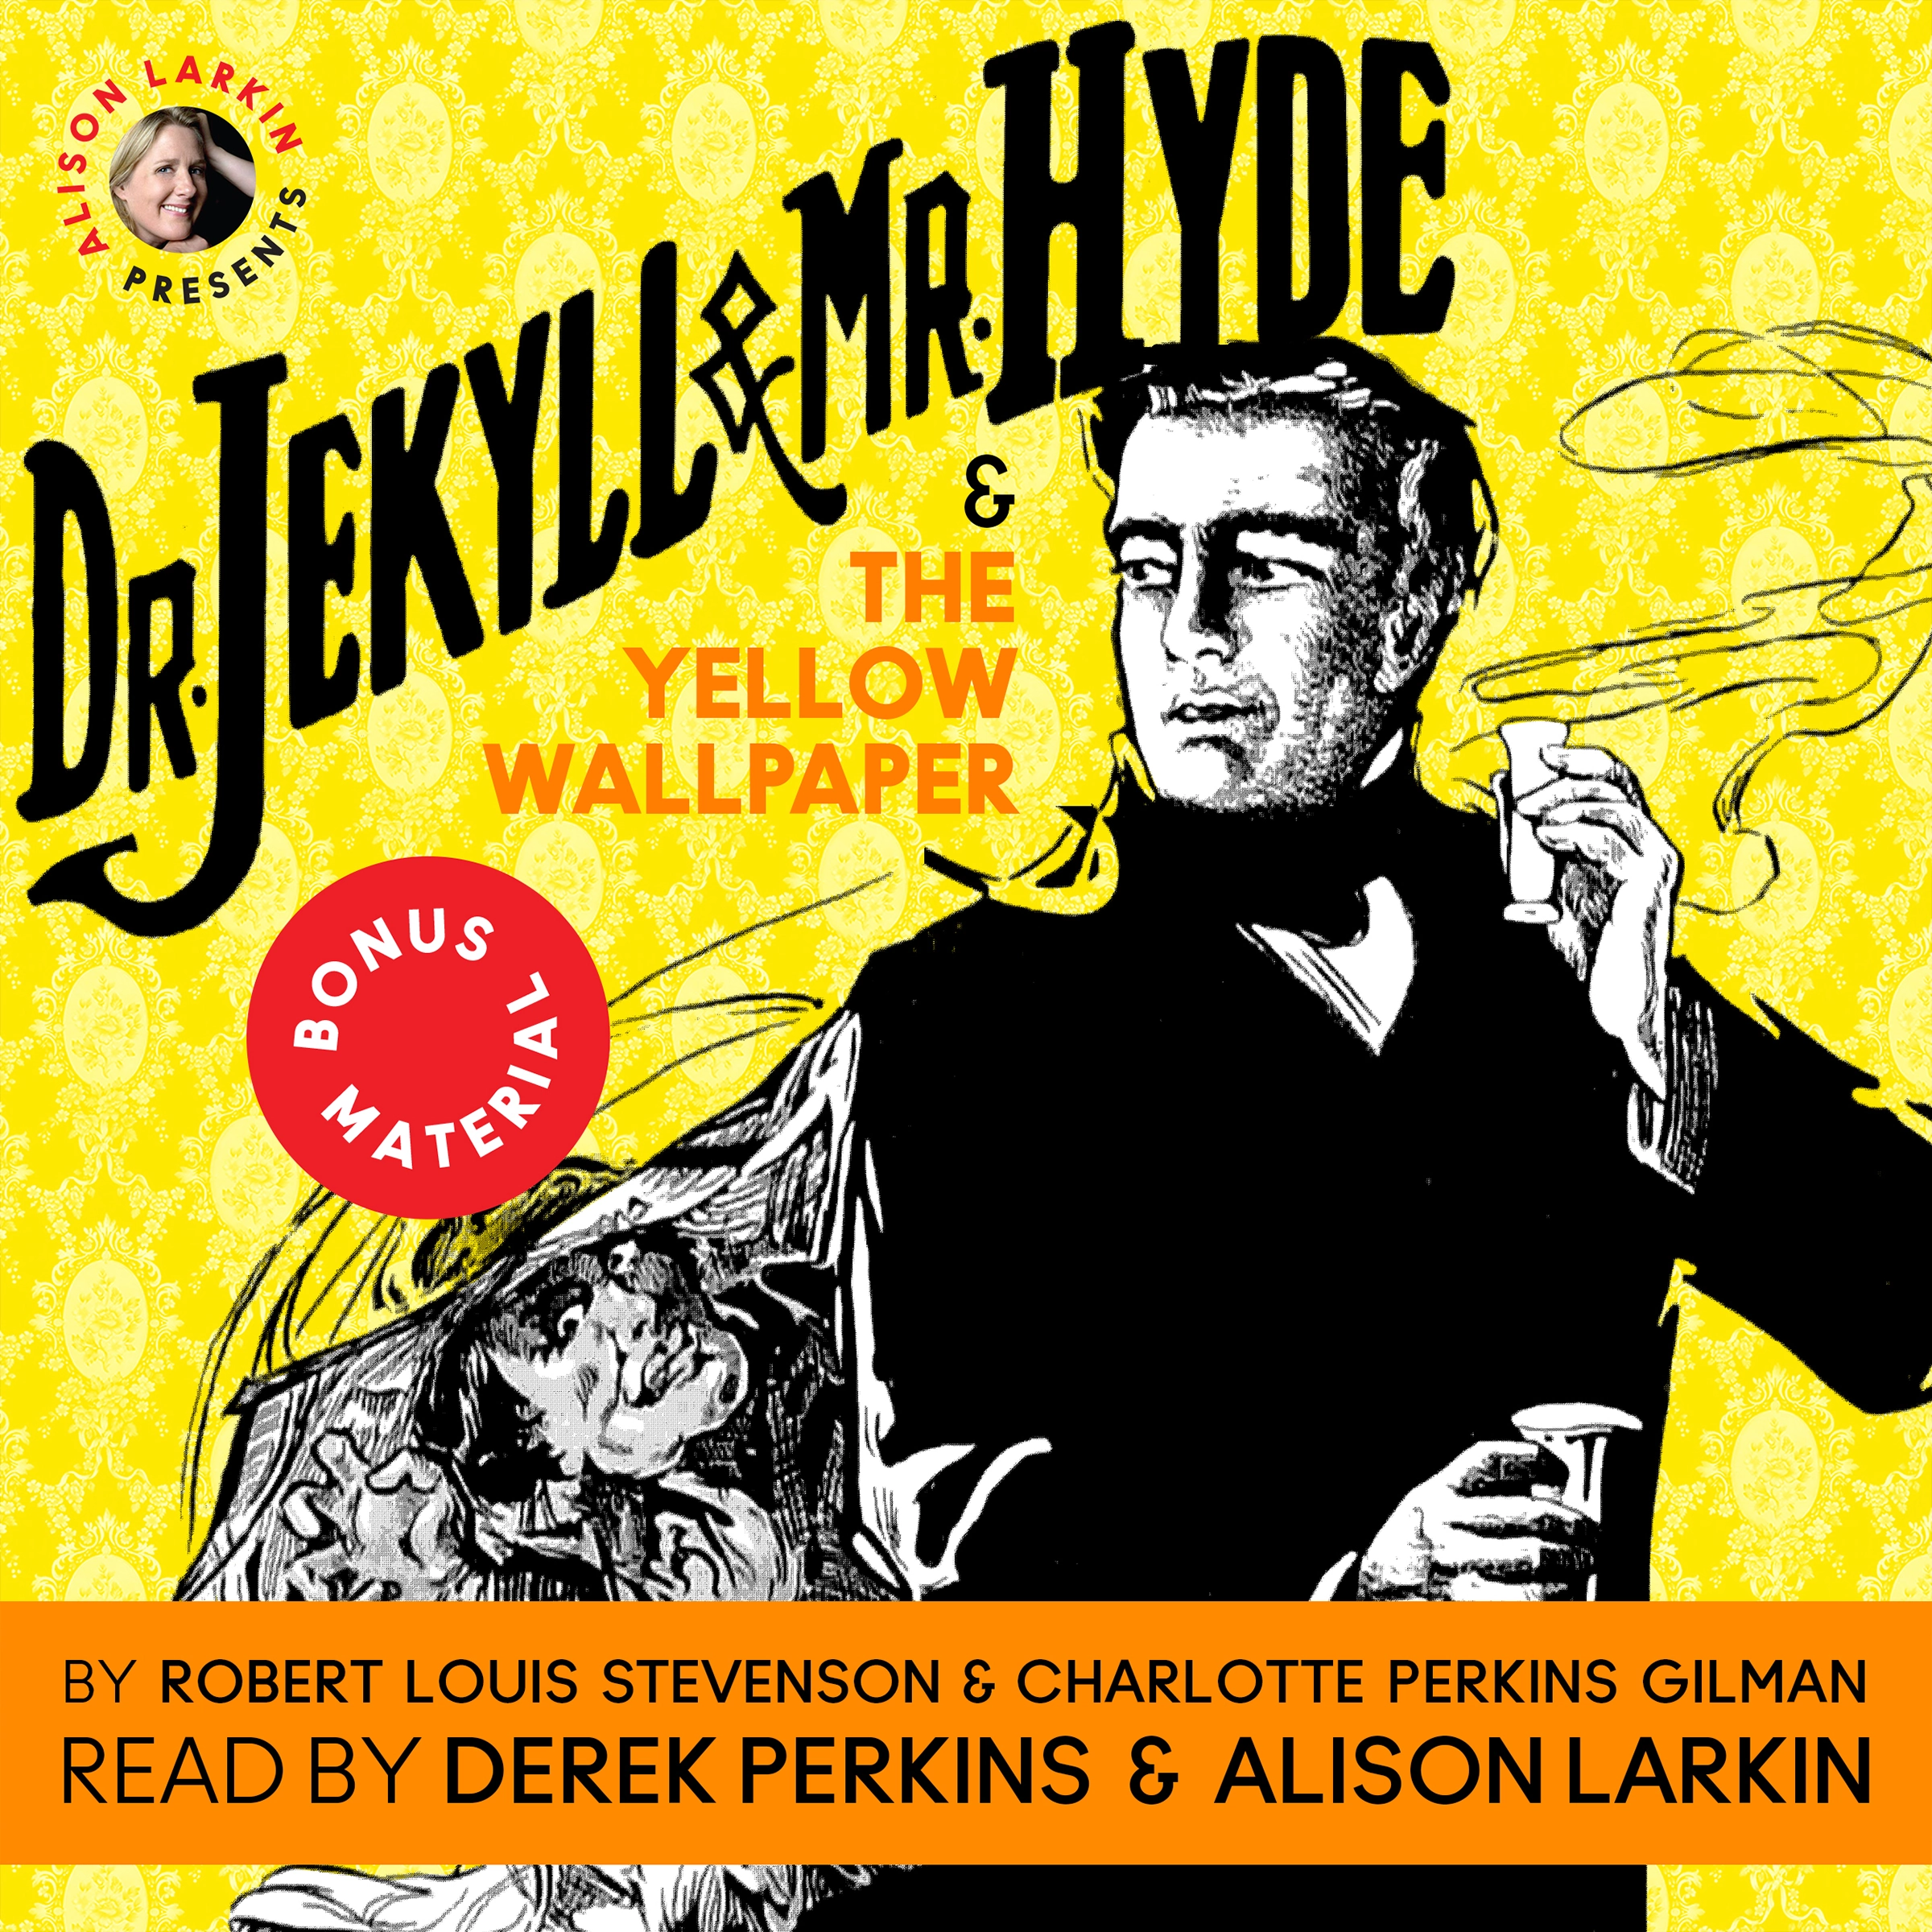 Dr. Jekyll and Mr. Hyde & The Yellow Wallpaper with Commentary by Alison Larkin by Robert Louis Stevenson and Charlotte Perkins Gilman with commentary by Alison Larkin Audiobook